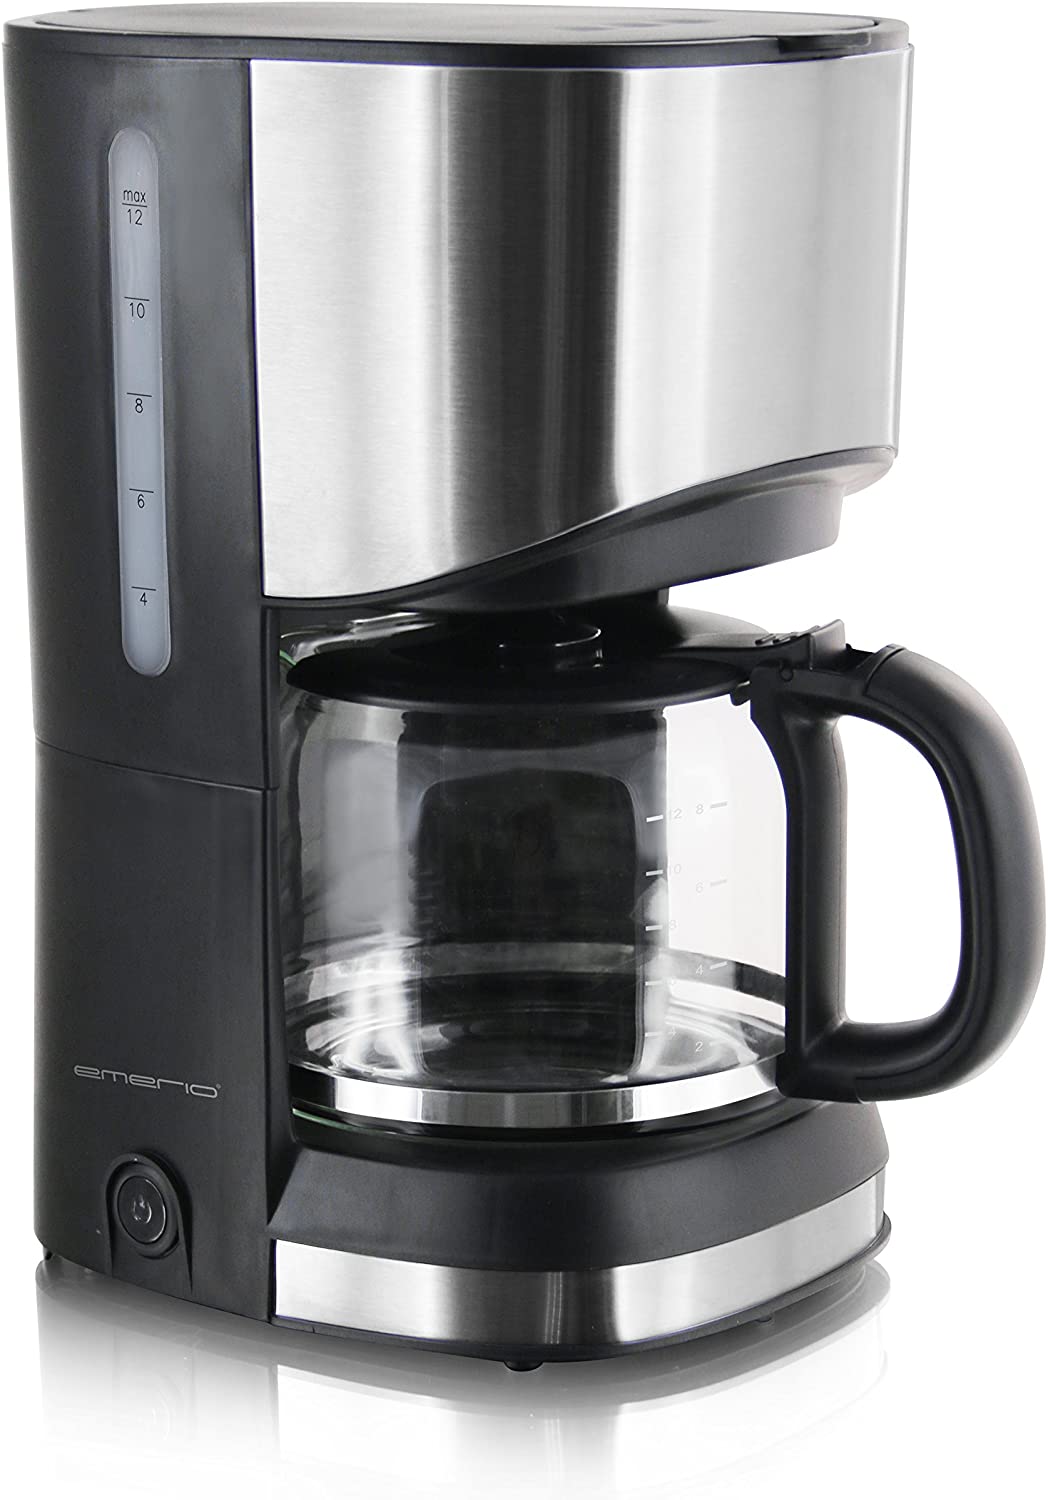 Emerio CME-111063 Filter Coffee Machine, 1.2 Litres, Stainless Steel, Black